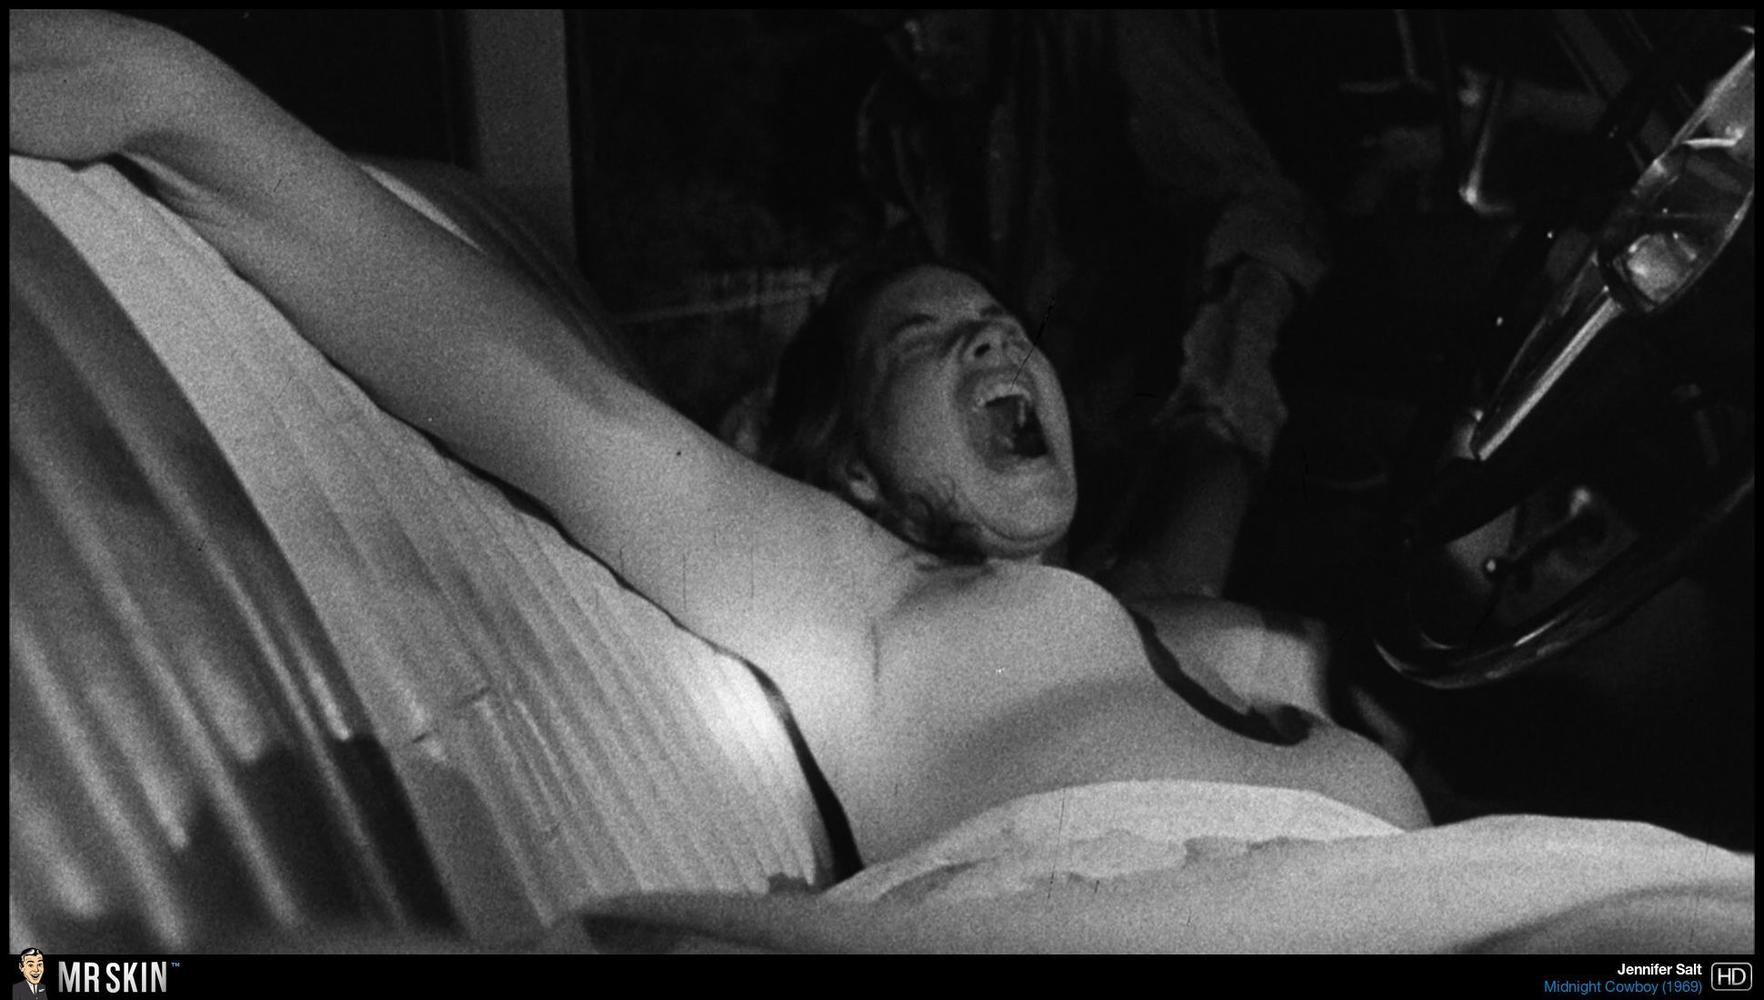 A Skin Depth Look At The Sex And Nudity Of John Schlesingers Films 